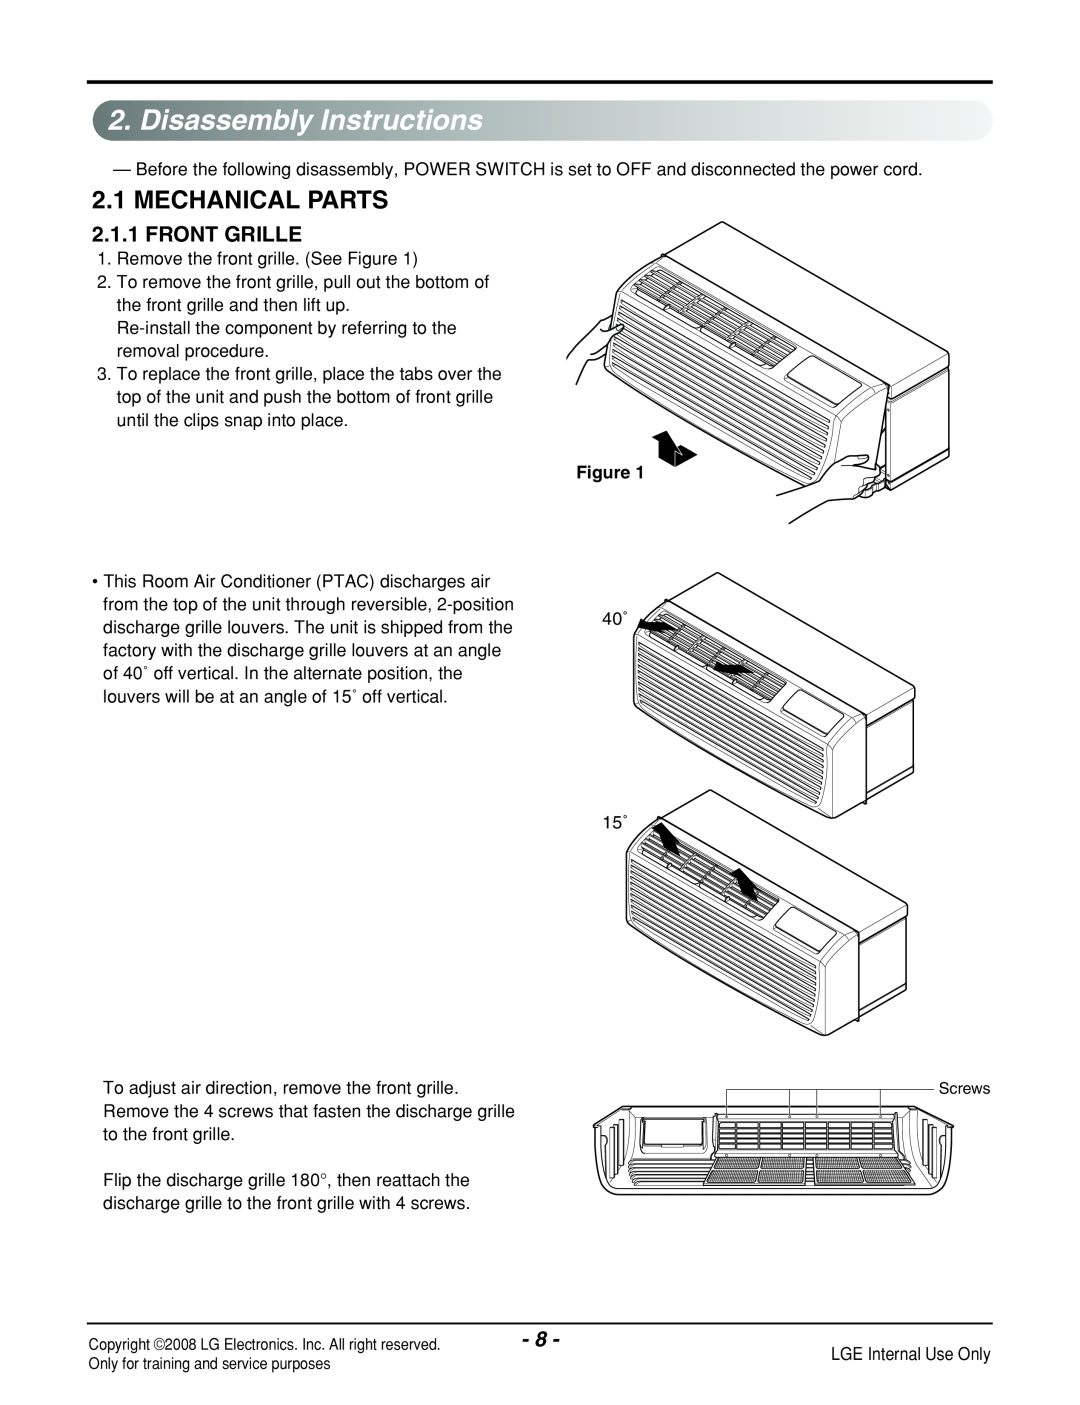 LG Electronics LP121CEM-Y8 manual Disassembly Instructions, Mechanical Parts, Front Grille 